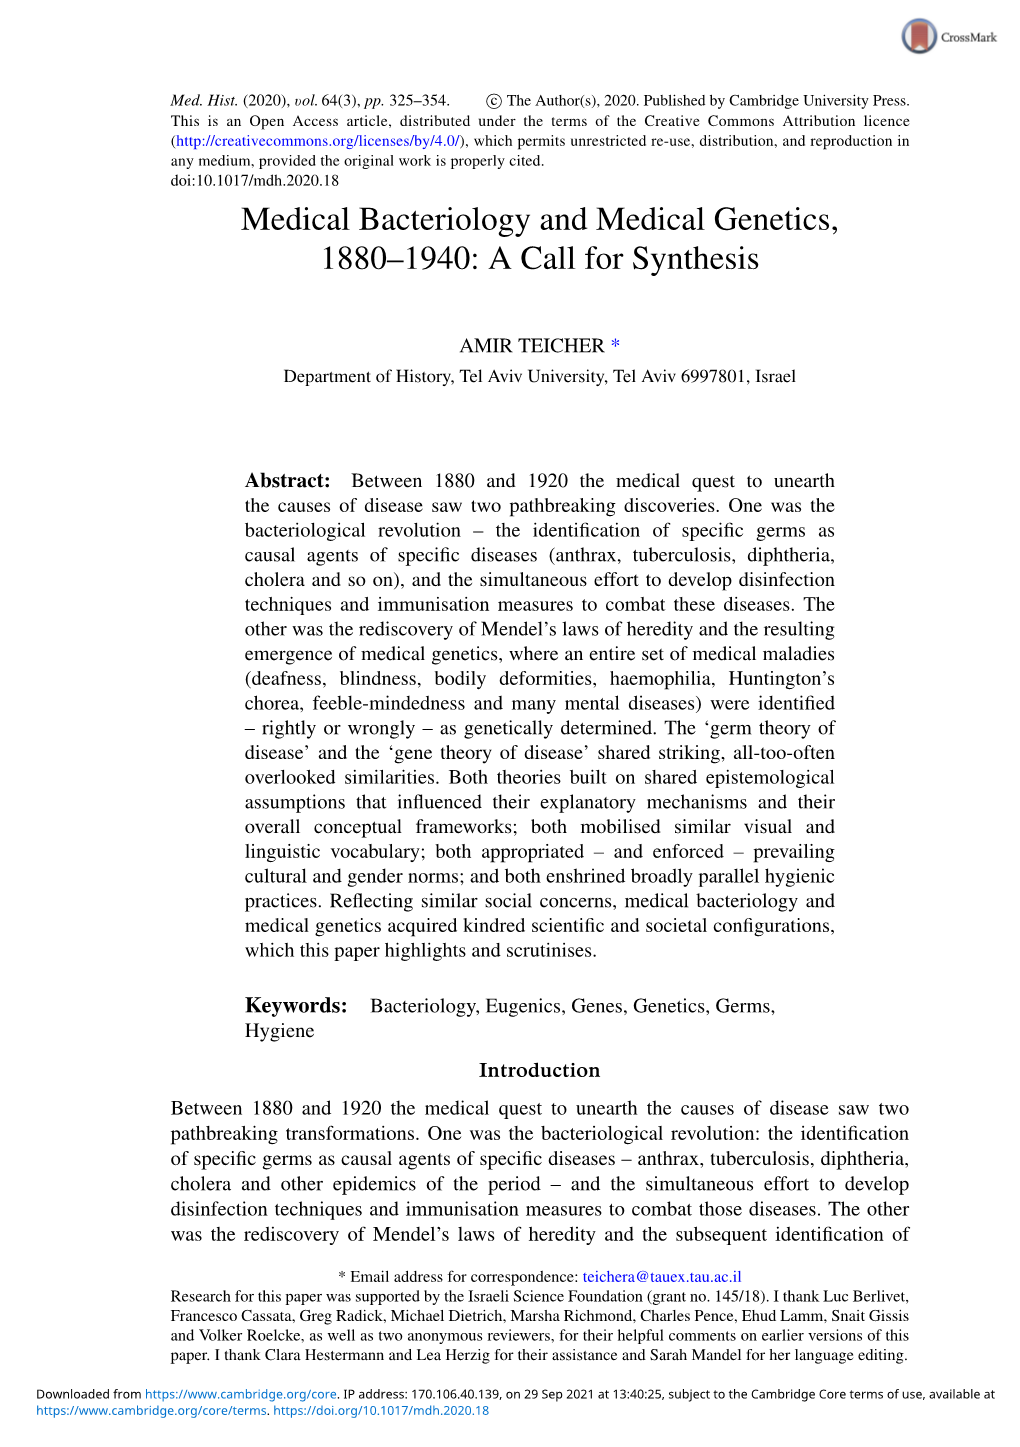 Medical Bacteriology and Medical Genetics, 1880–1940: a Call for Synthesis